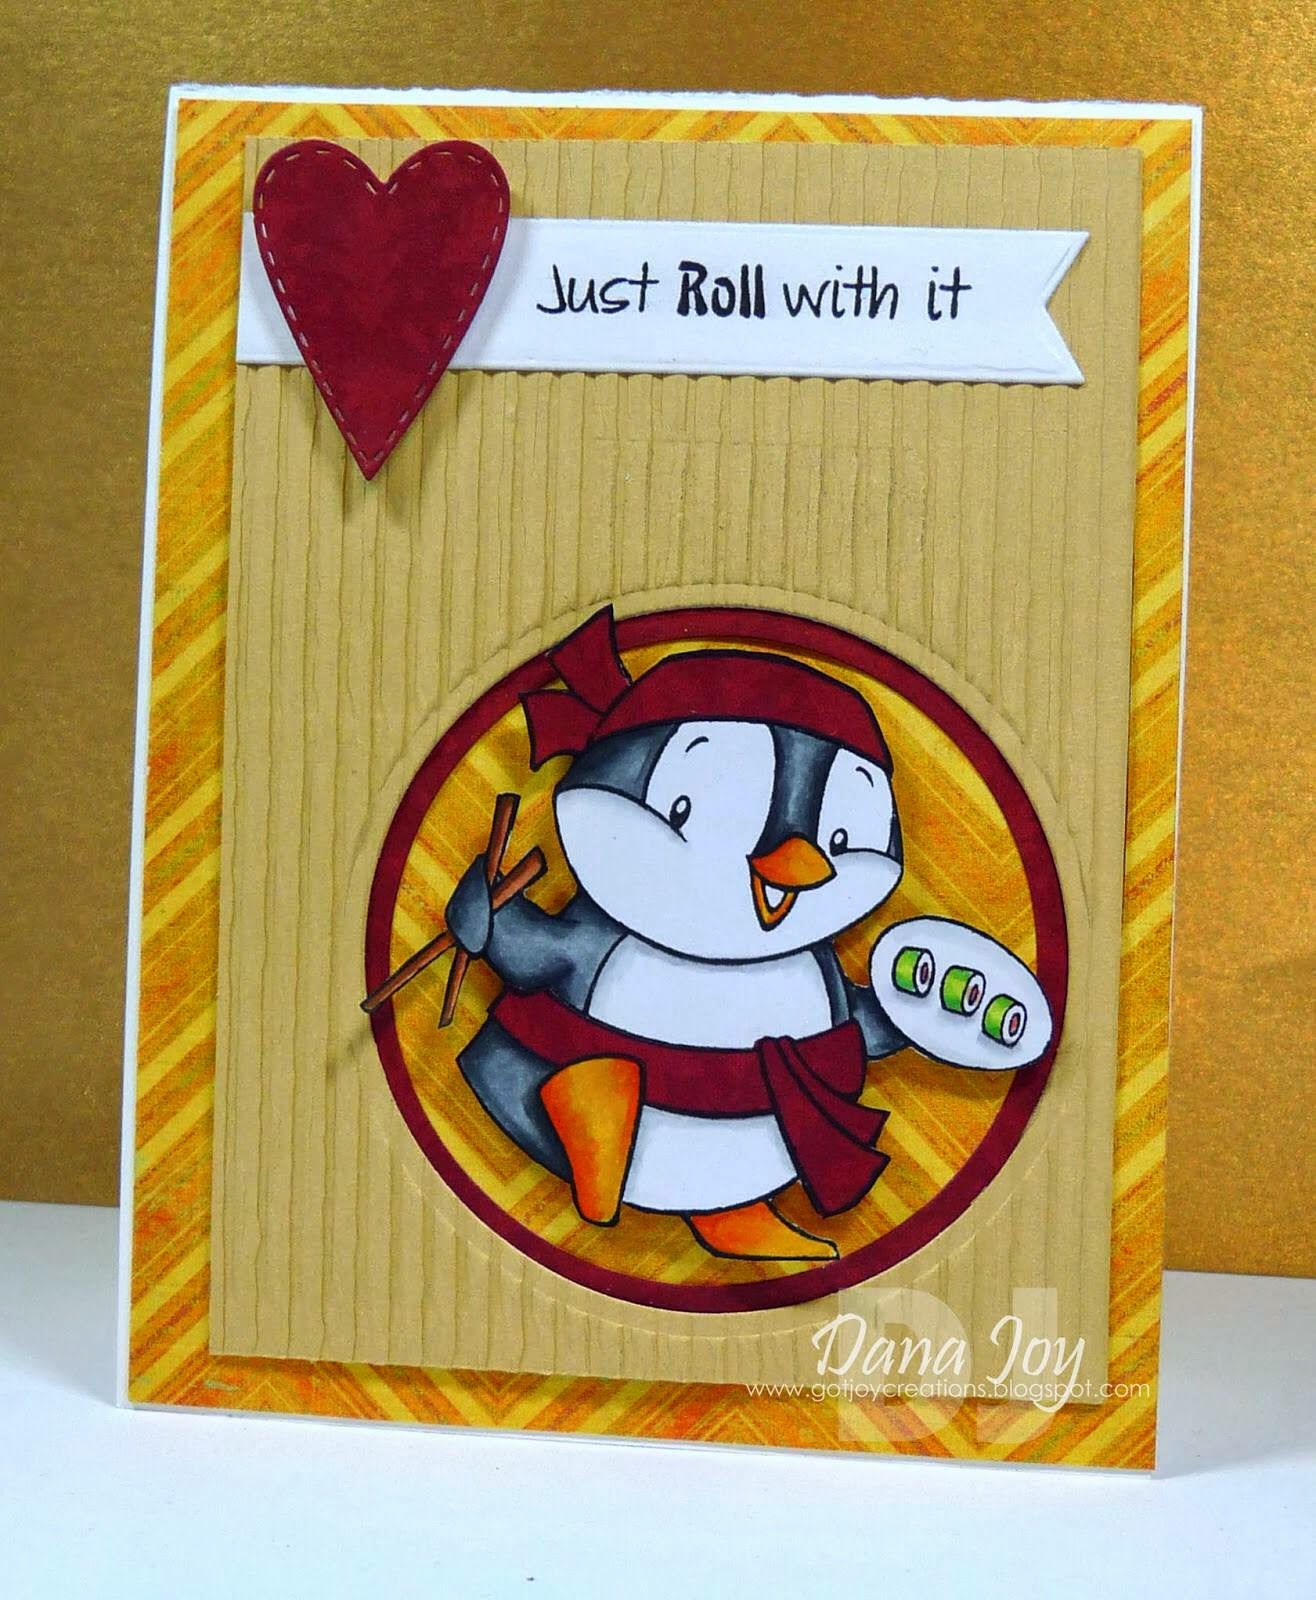 http://gotjoycreations.blogspot.com/2014/03/just-roll-with-it.html